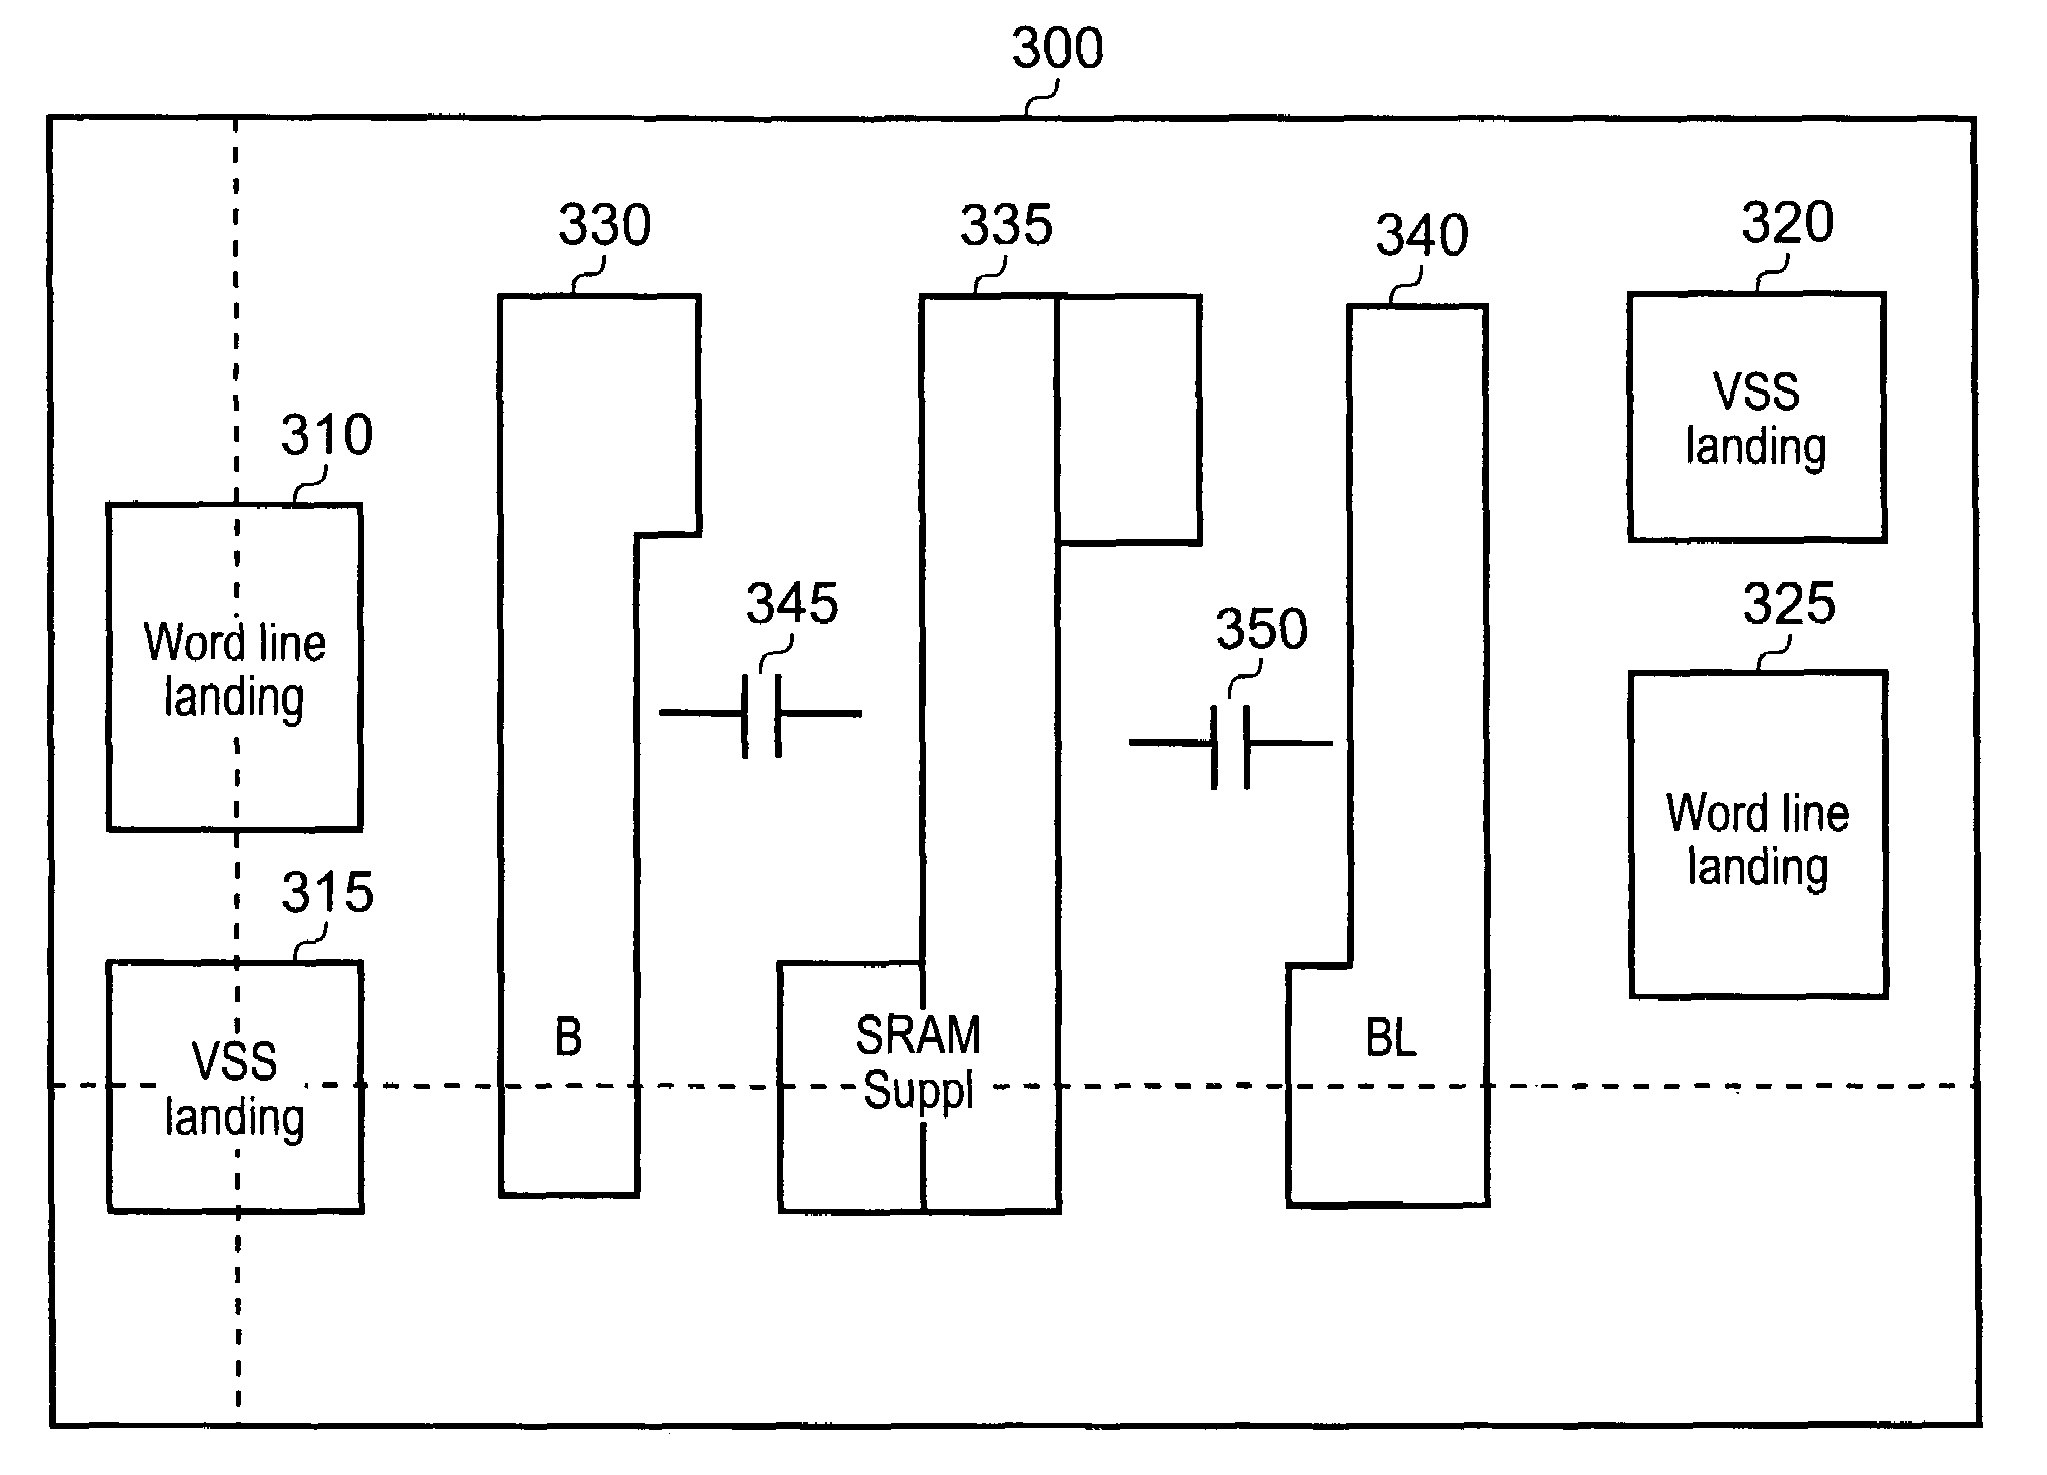 Memory device and method of operating such a memory device